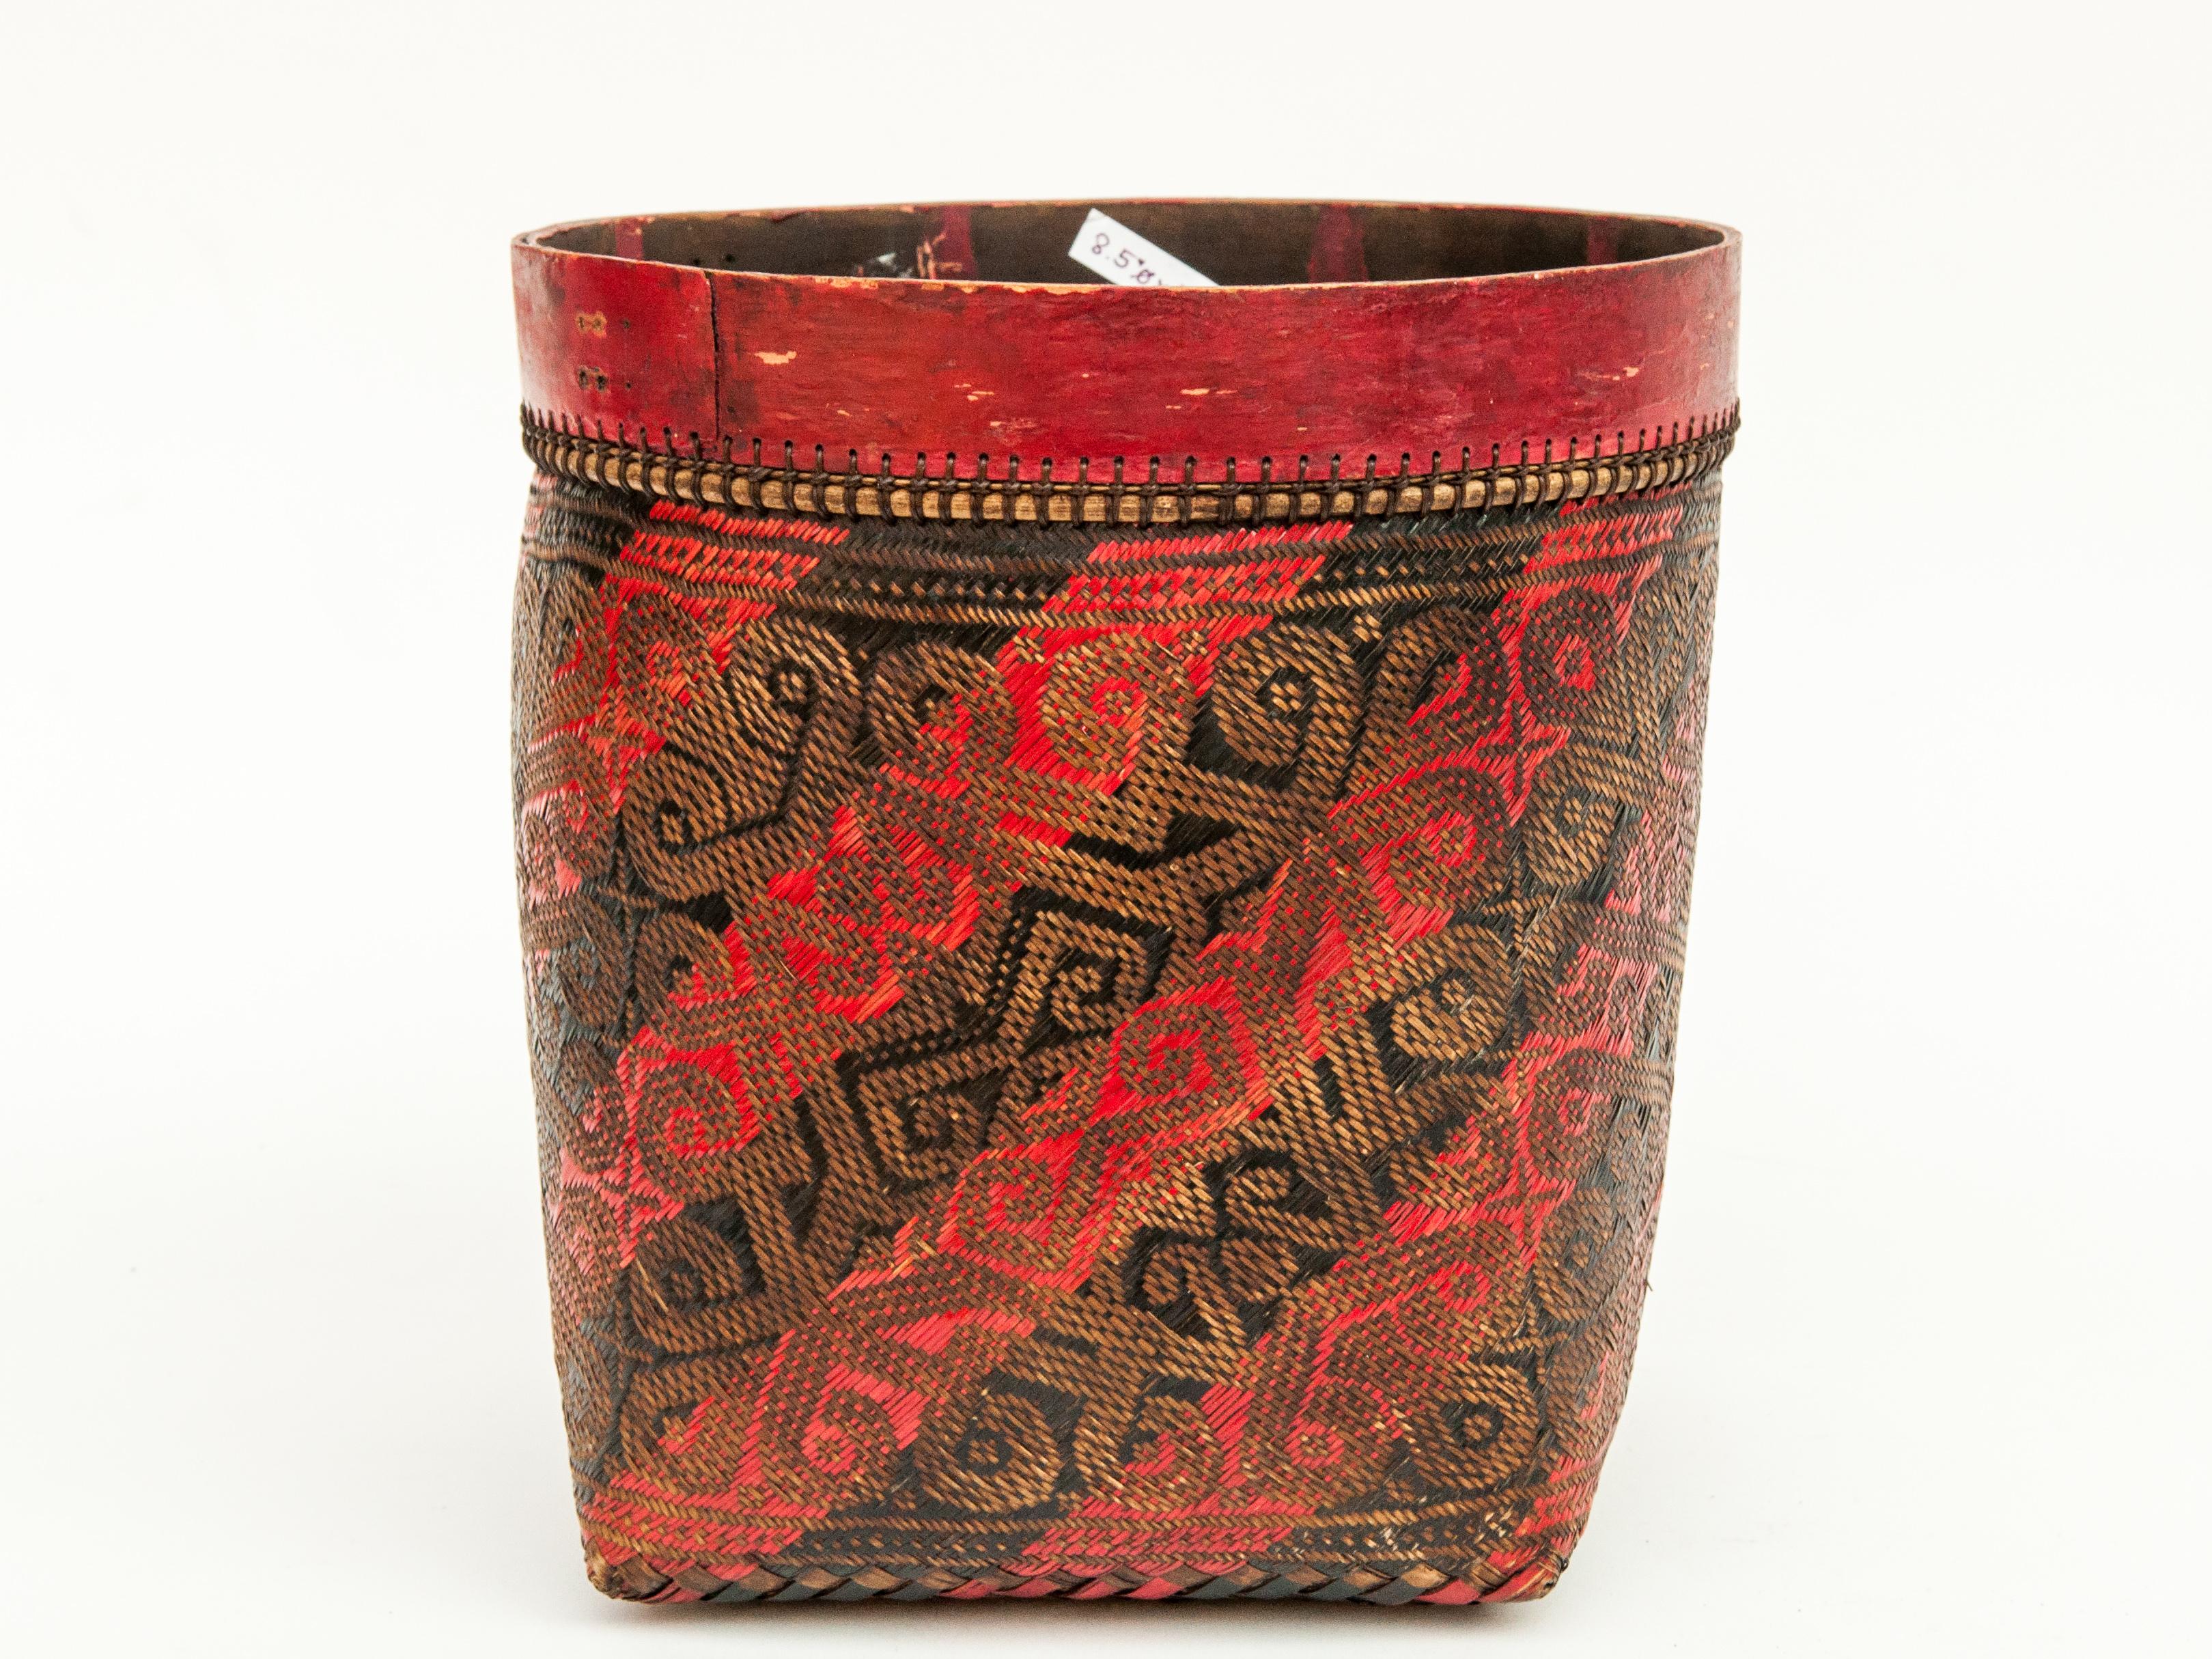 Tribal Vintage Seed Basket, with Woven Design, Iban of Borneo, Mid-Late 20th Century